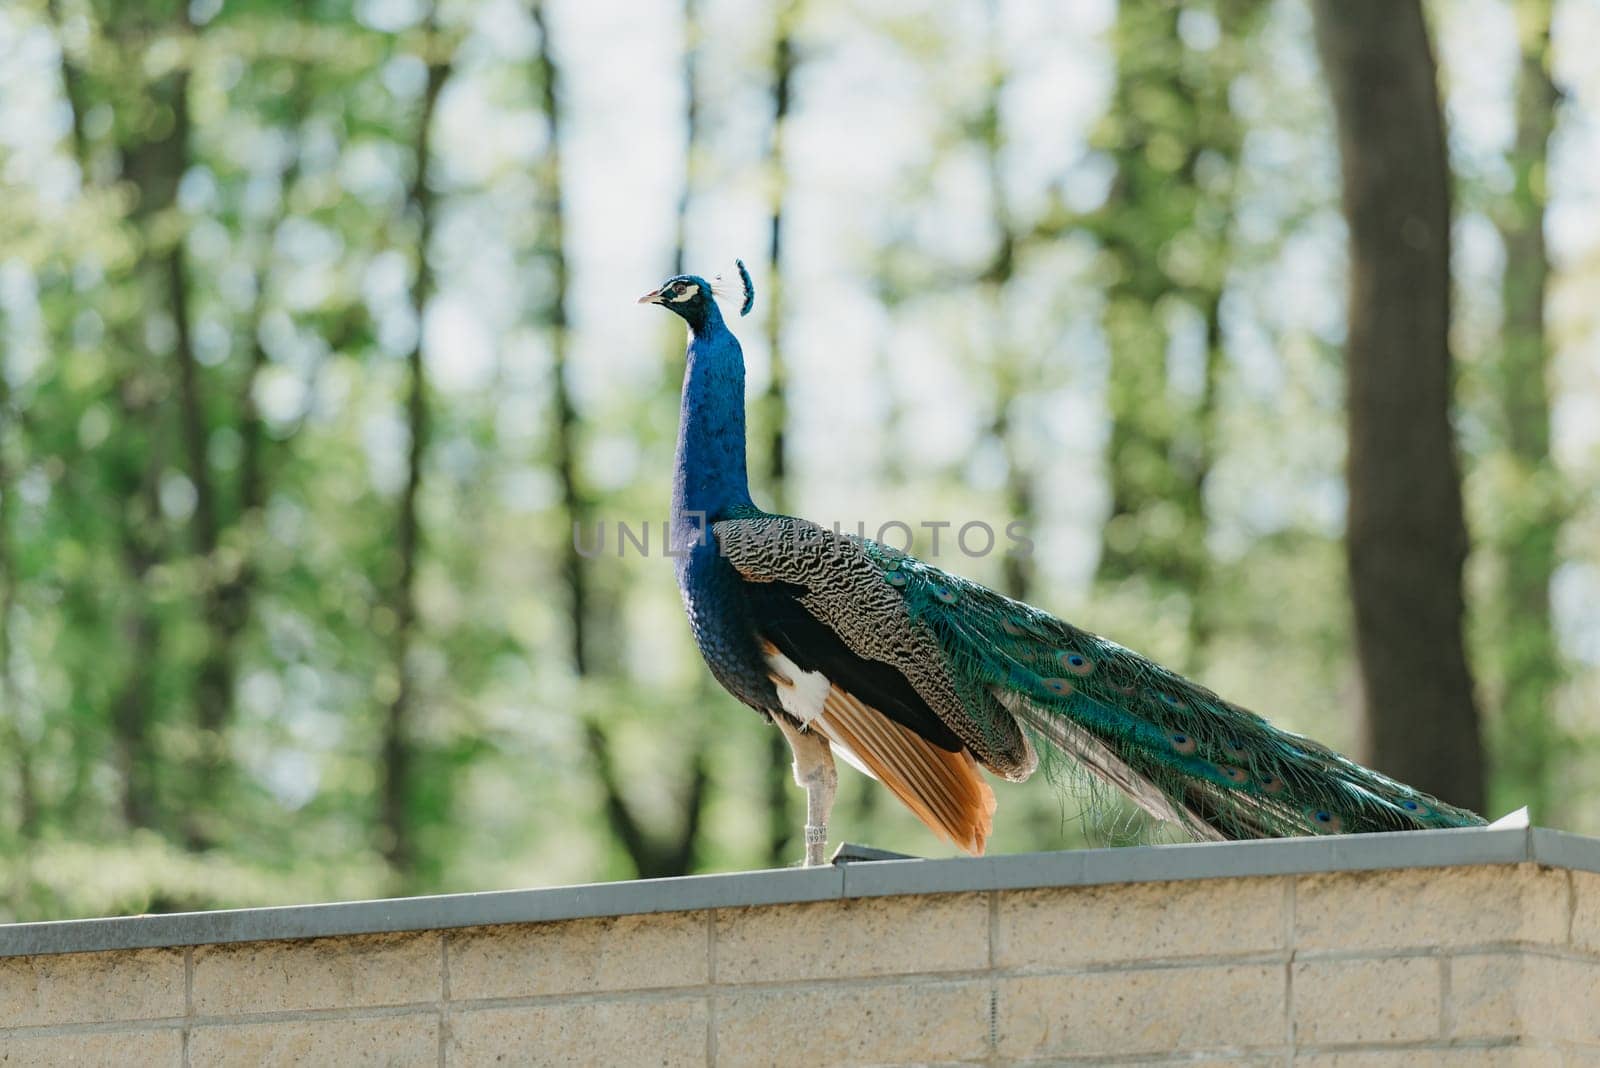 The Indian peafowl walks on the roof in the park in the morning. the common peacock in the forest.